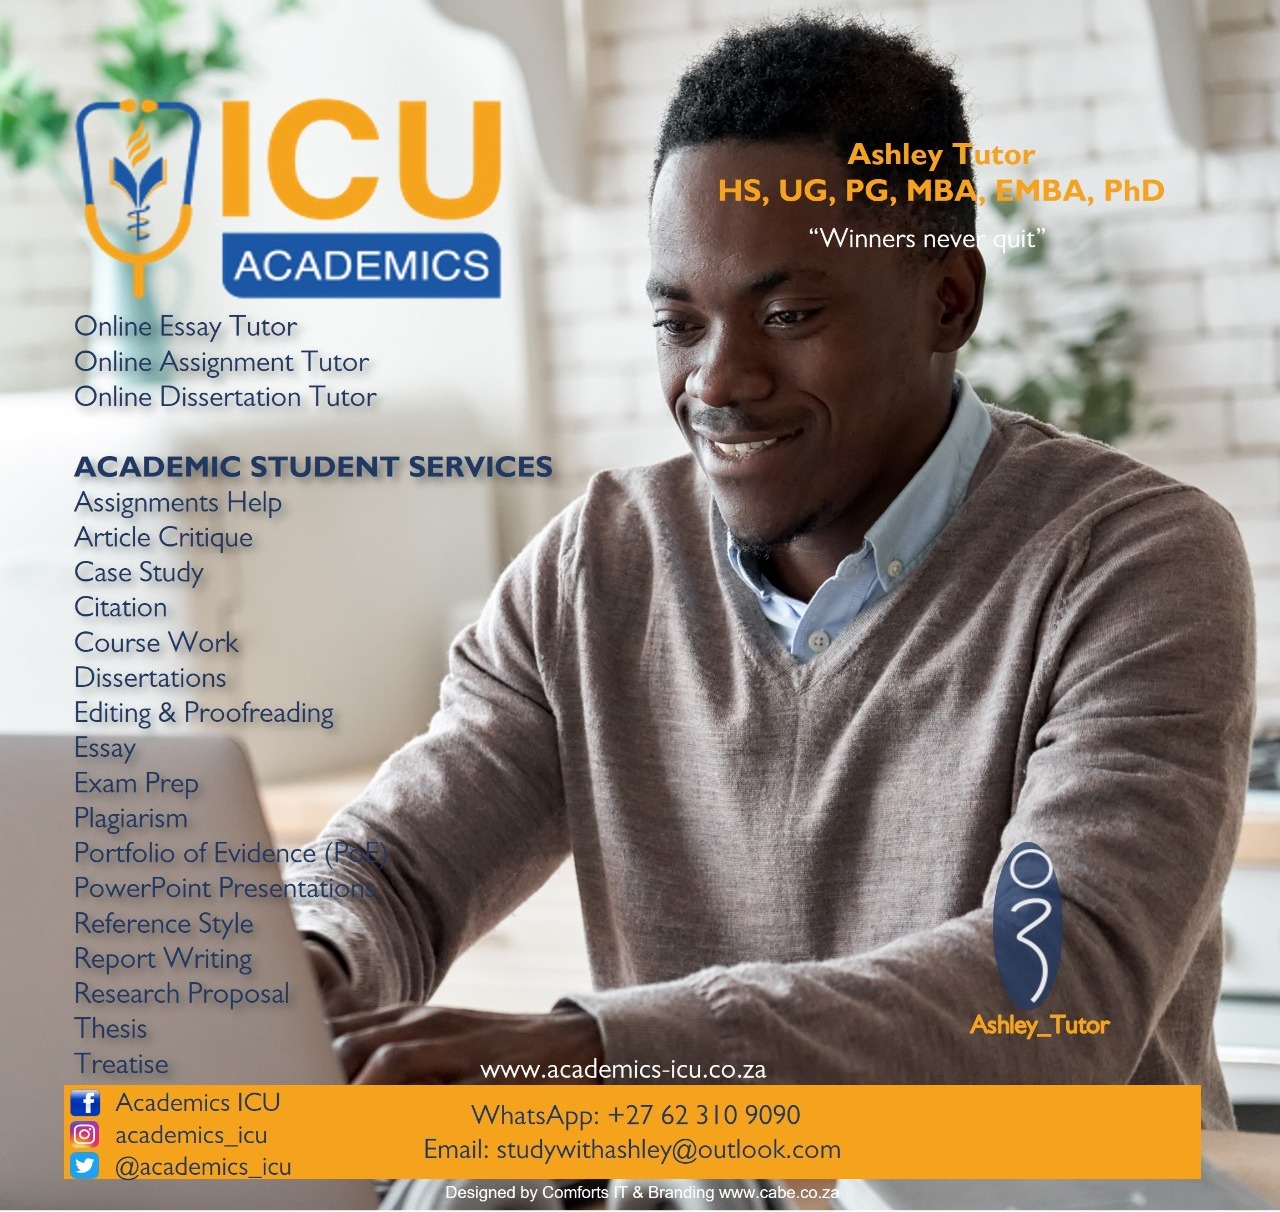 All Assignment Help, Academic Writing, Admission Services, CV & Resume Writing, Dissertation Coaching & Writing Services, Student Support Services, Business/ Institutions Support and Online Tutoring.